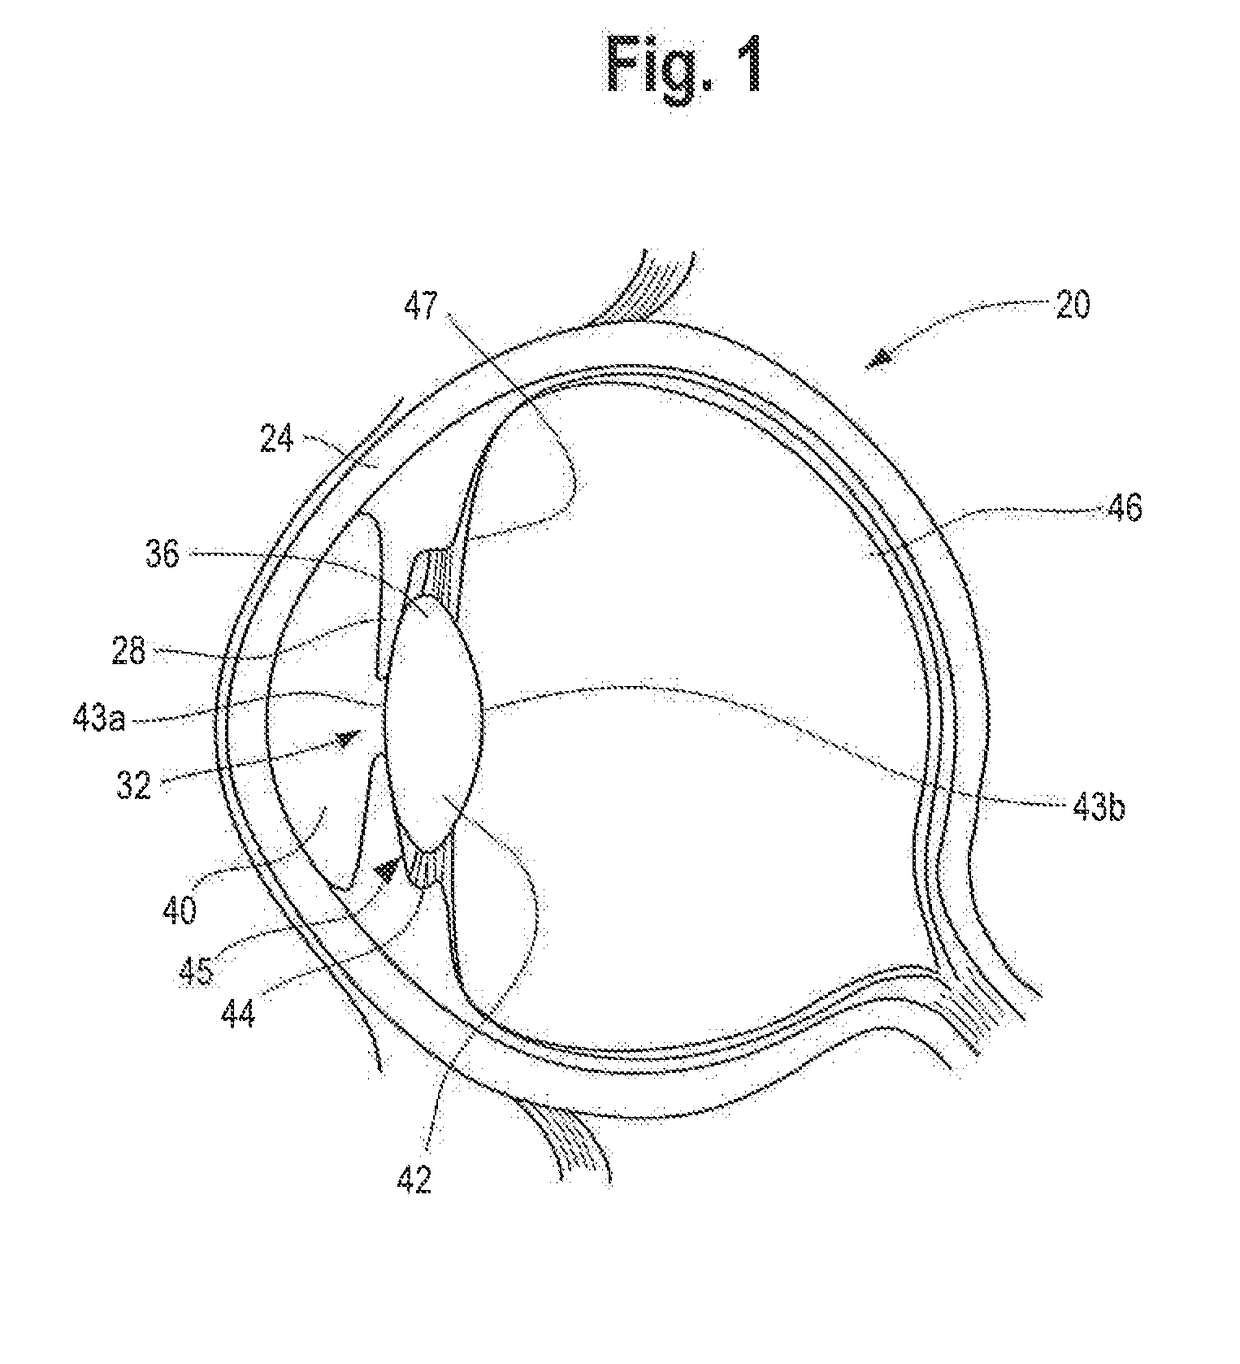 Intraocular lens and methods for implanting the same